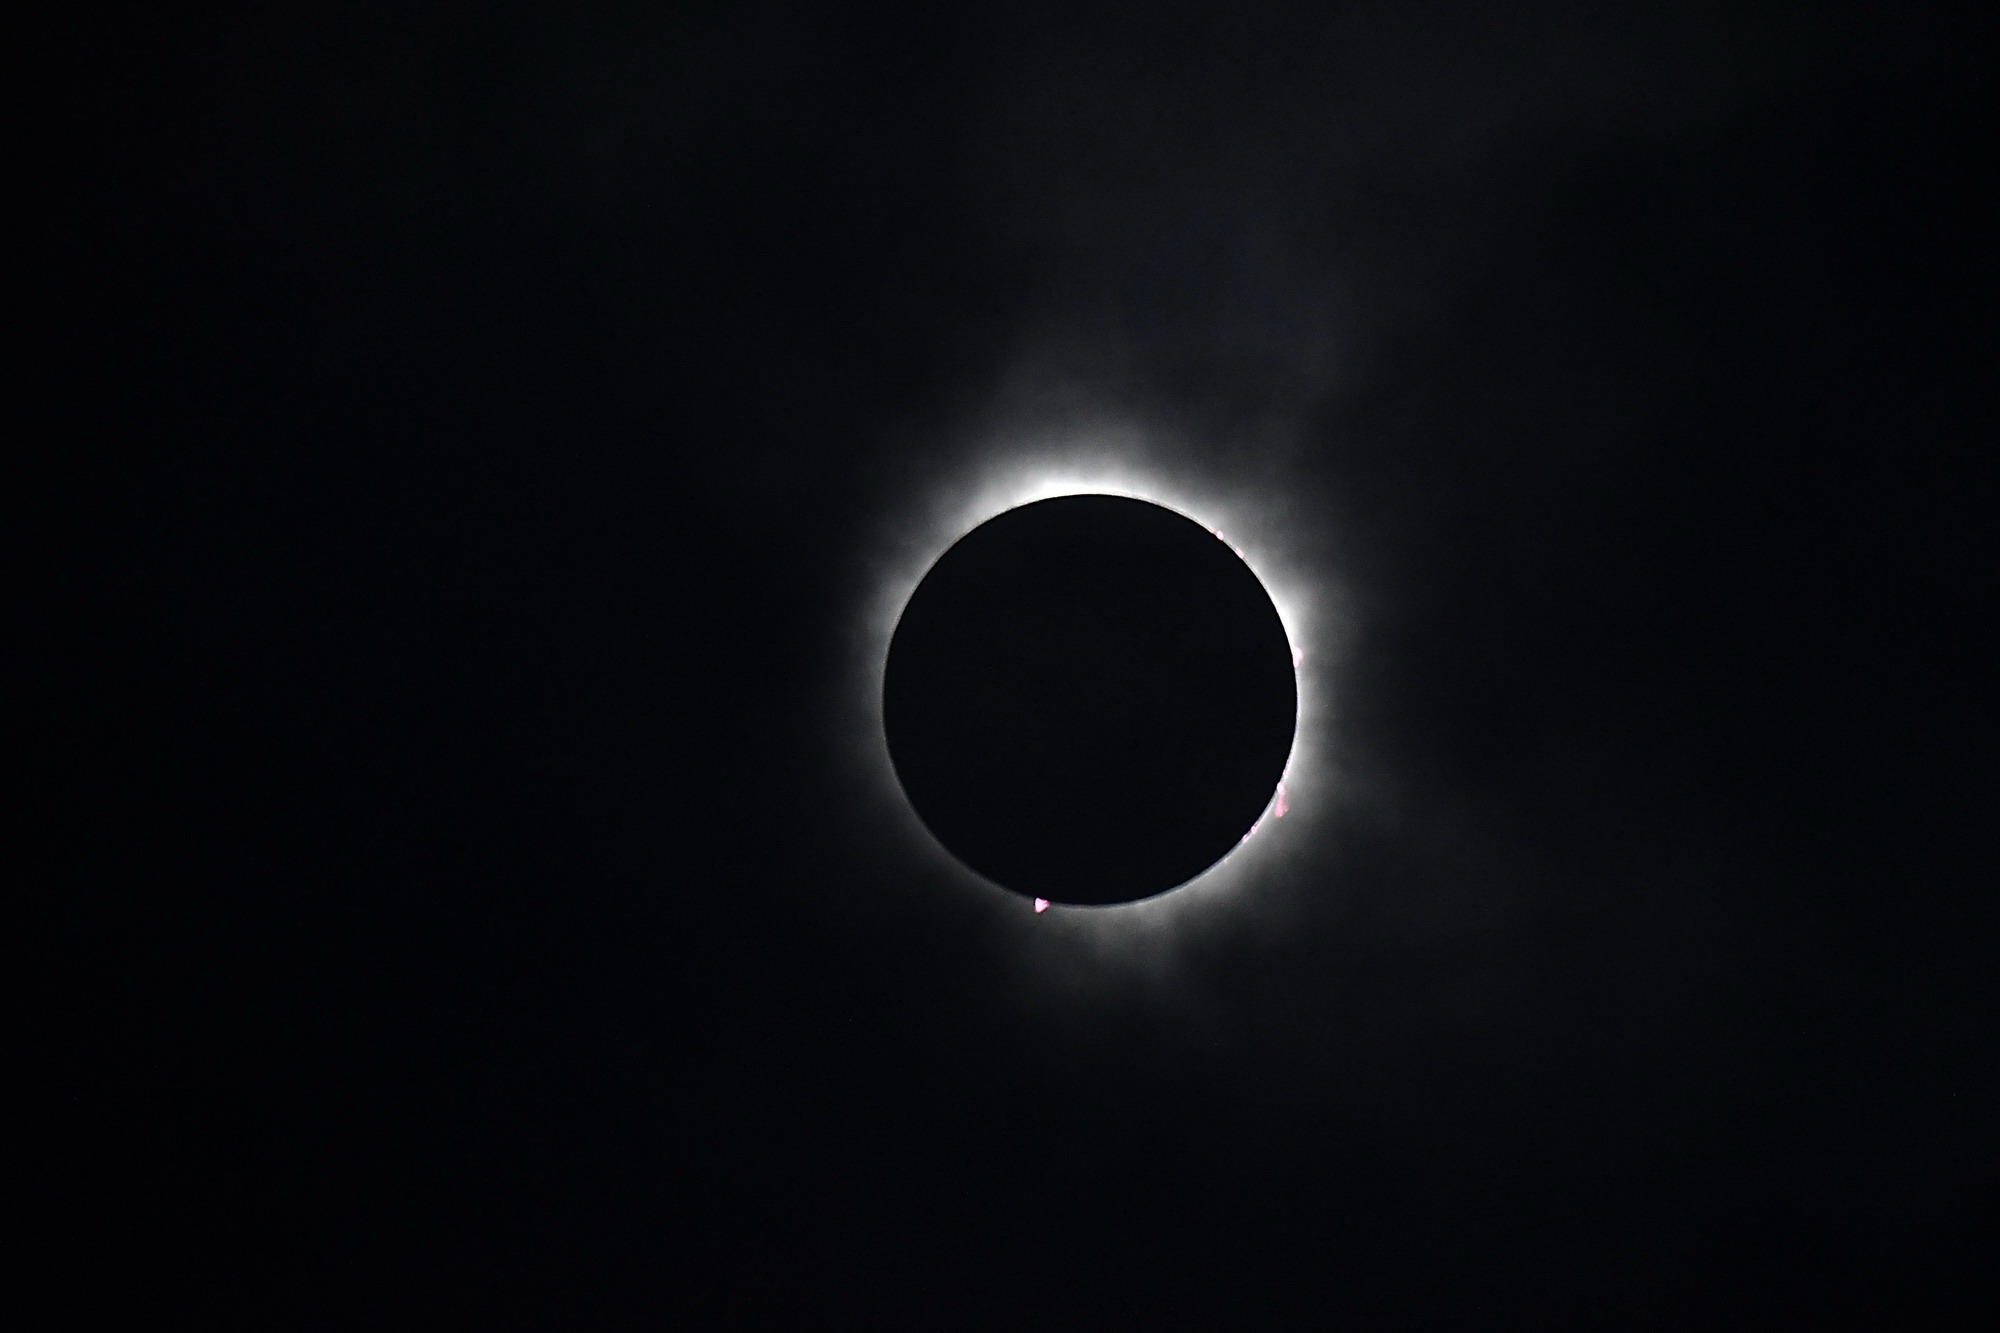 A total solar eclipse occurs about every 18 months - but it can be anywhere on Earth - on April 8, 2024, this was the view at 3:16 pm from Beamsville, Ontario, in the solar eclipse path of totality.